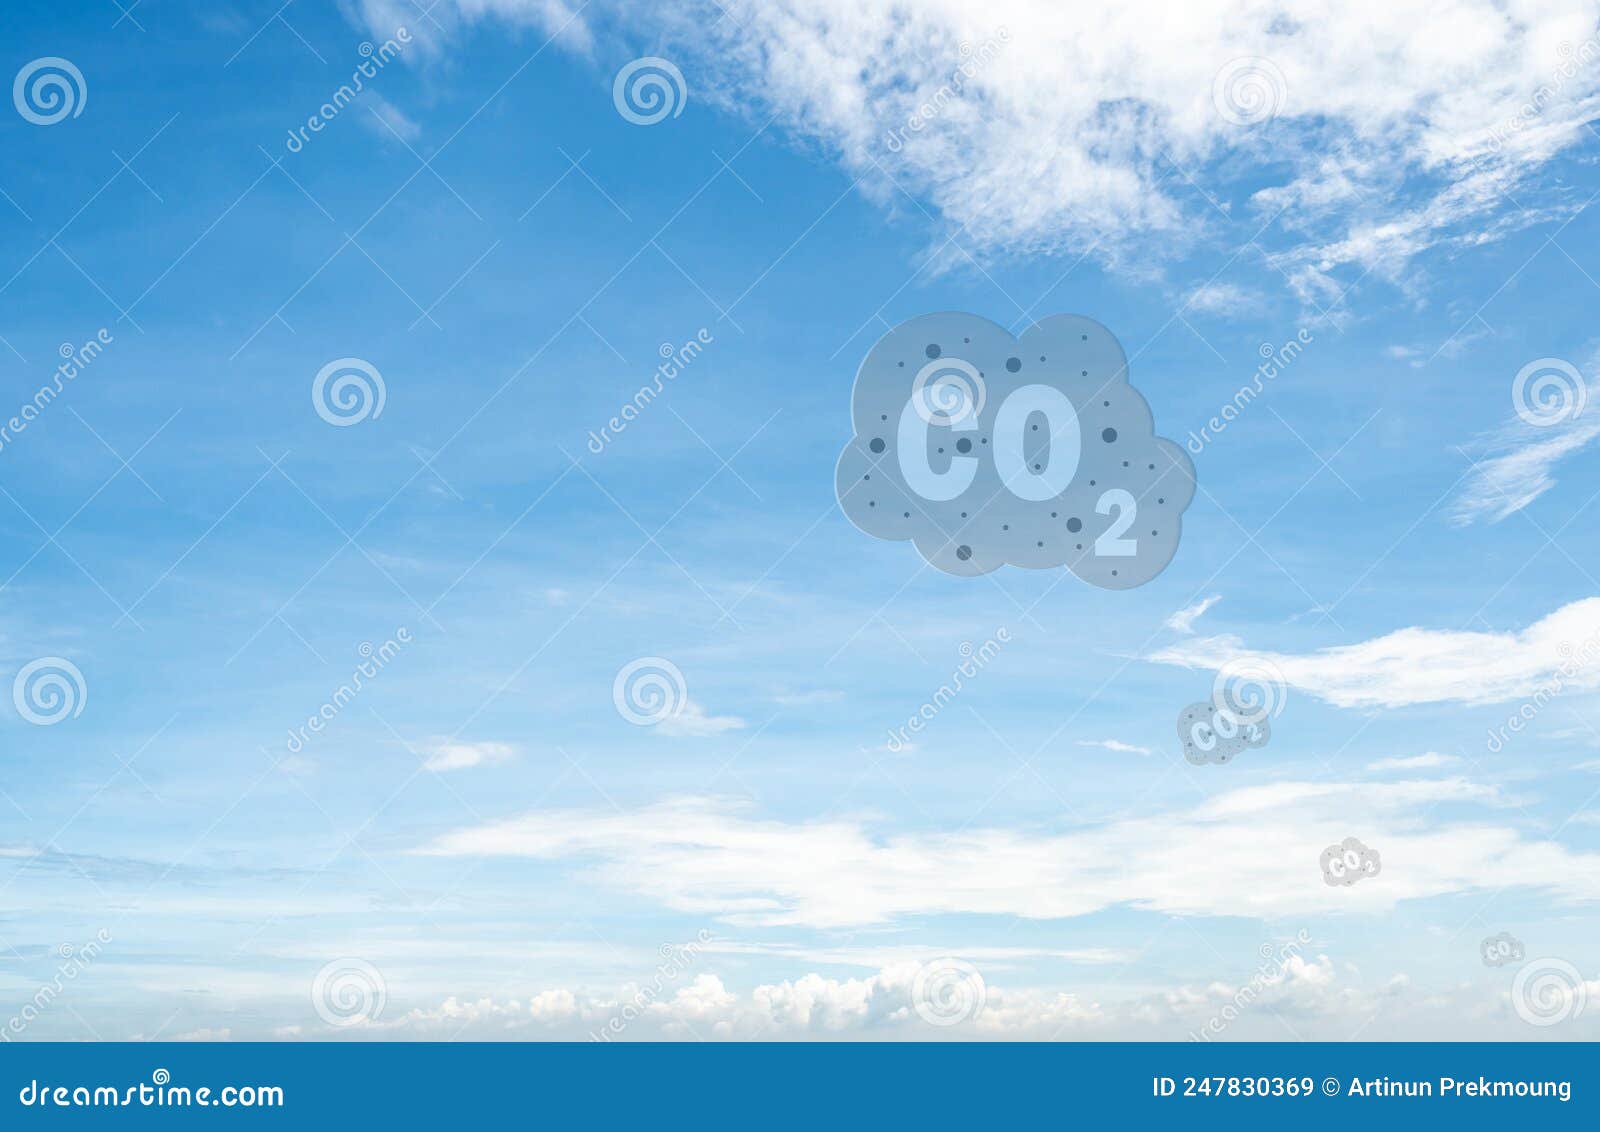 co2  on blue sky and white clouds. co2 emissions. greenhouse gas. carbon dioxide gas global air climate pollution.